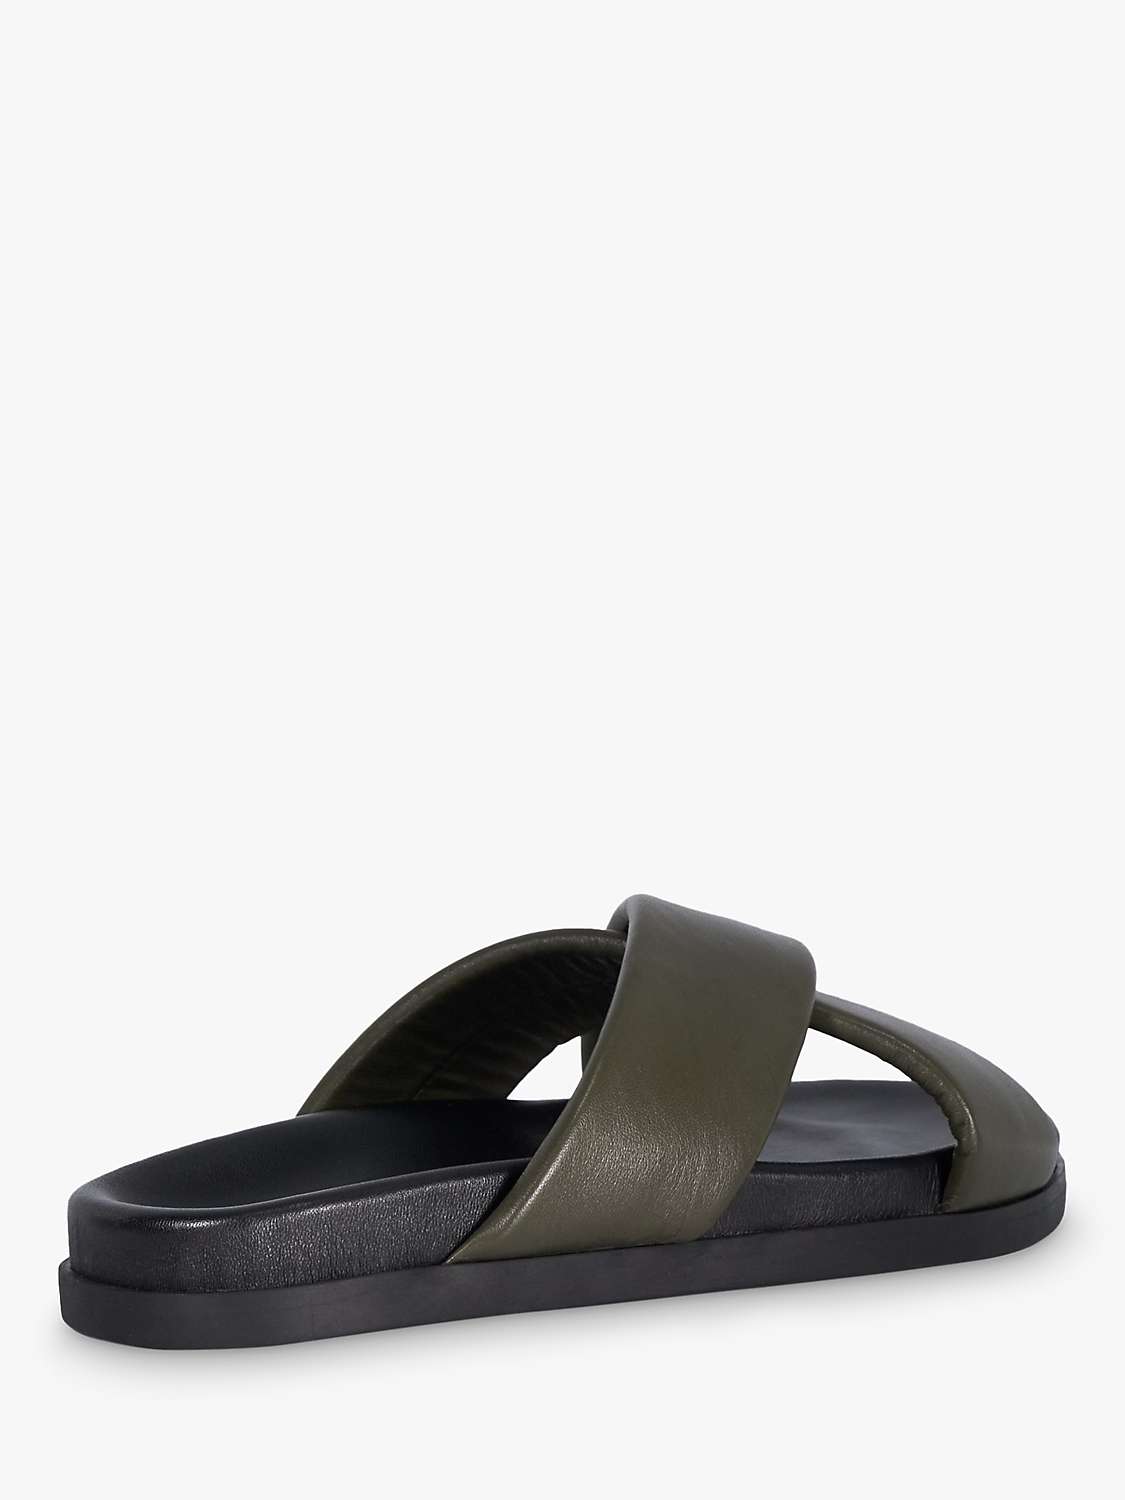 Buy Dune Isaacs Leather Cross Strap Sandals Online at johnlewis.com